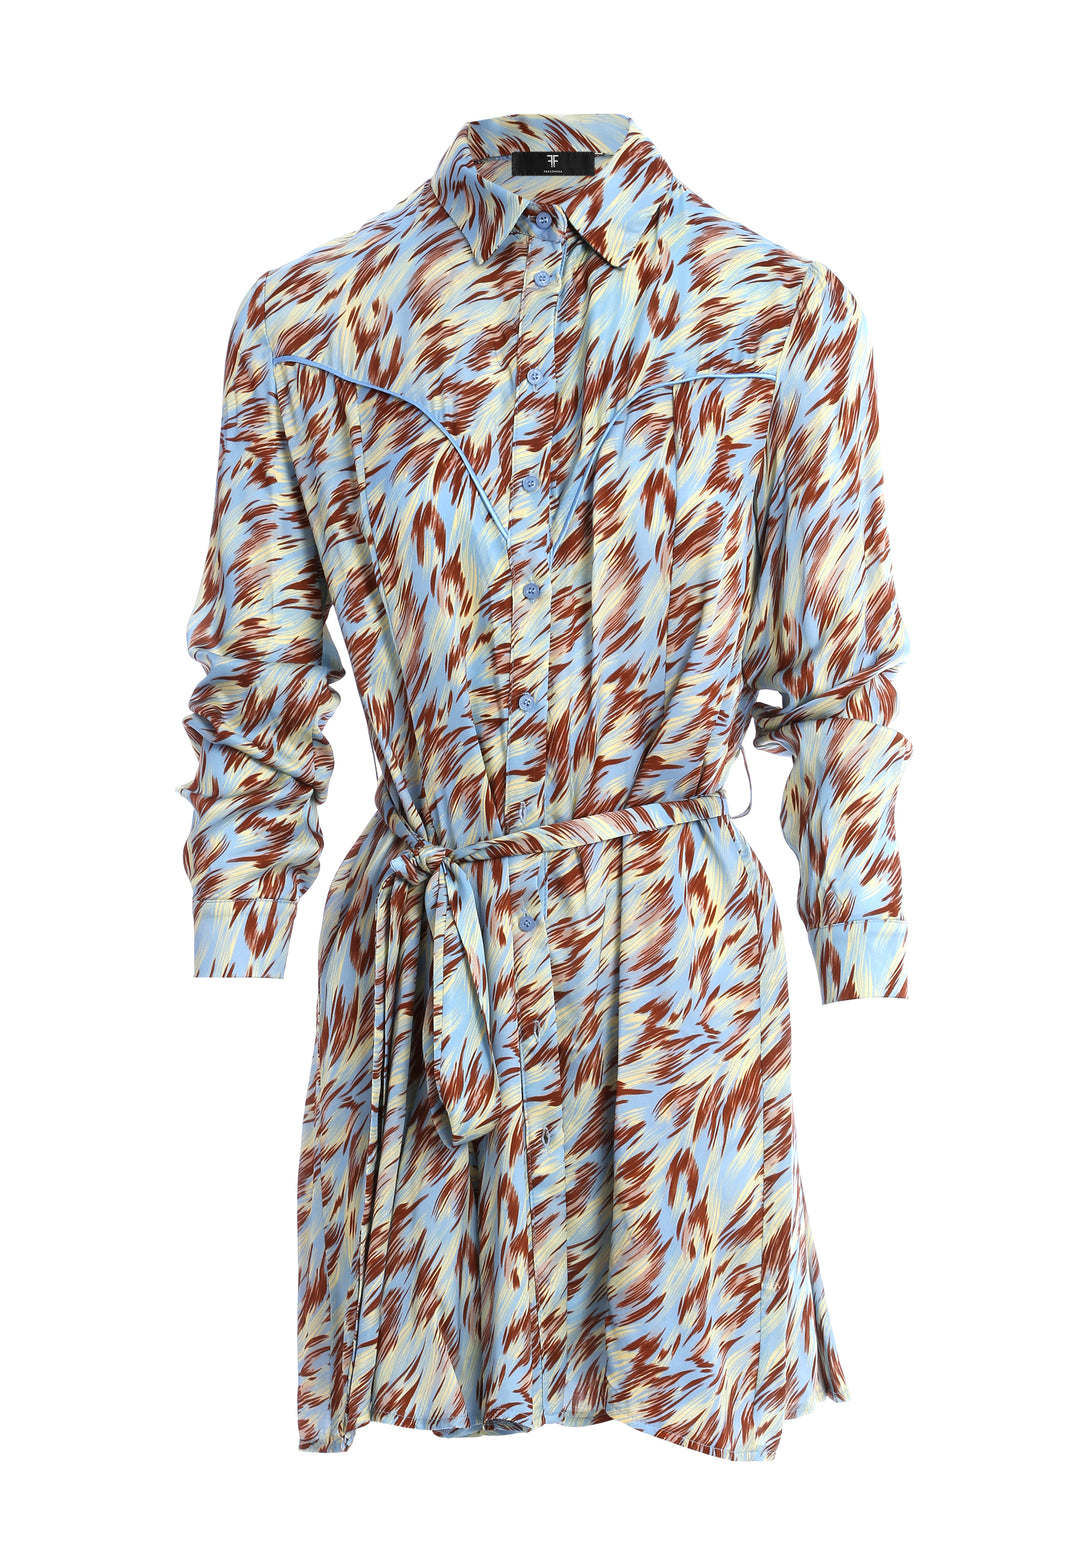 Chemisier dress regular fit with animalier pattern